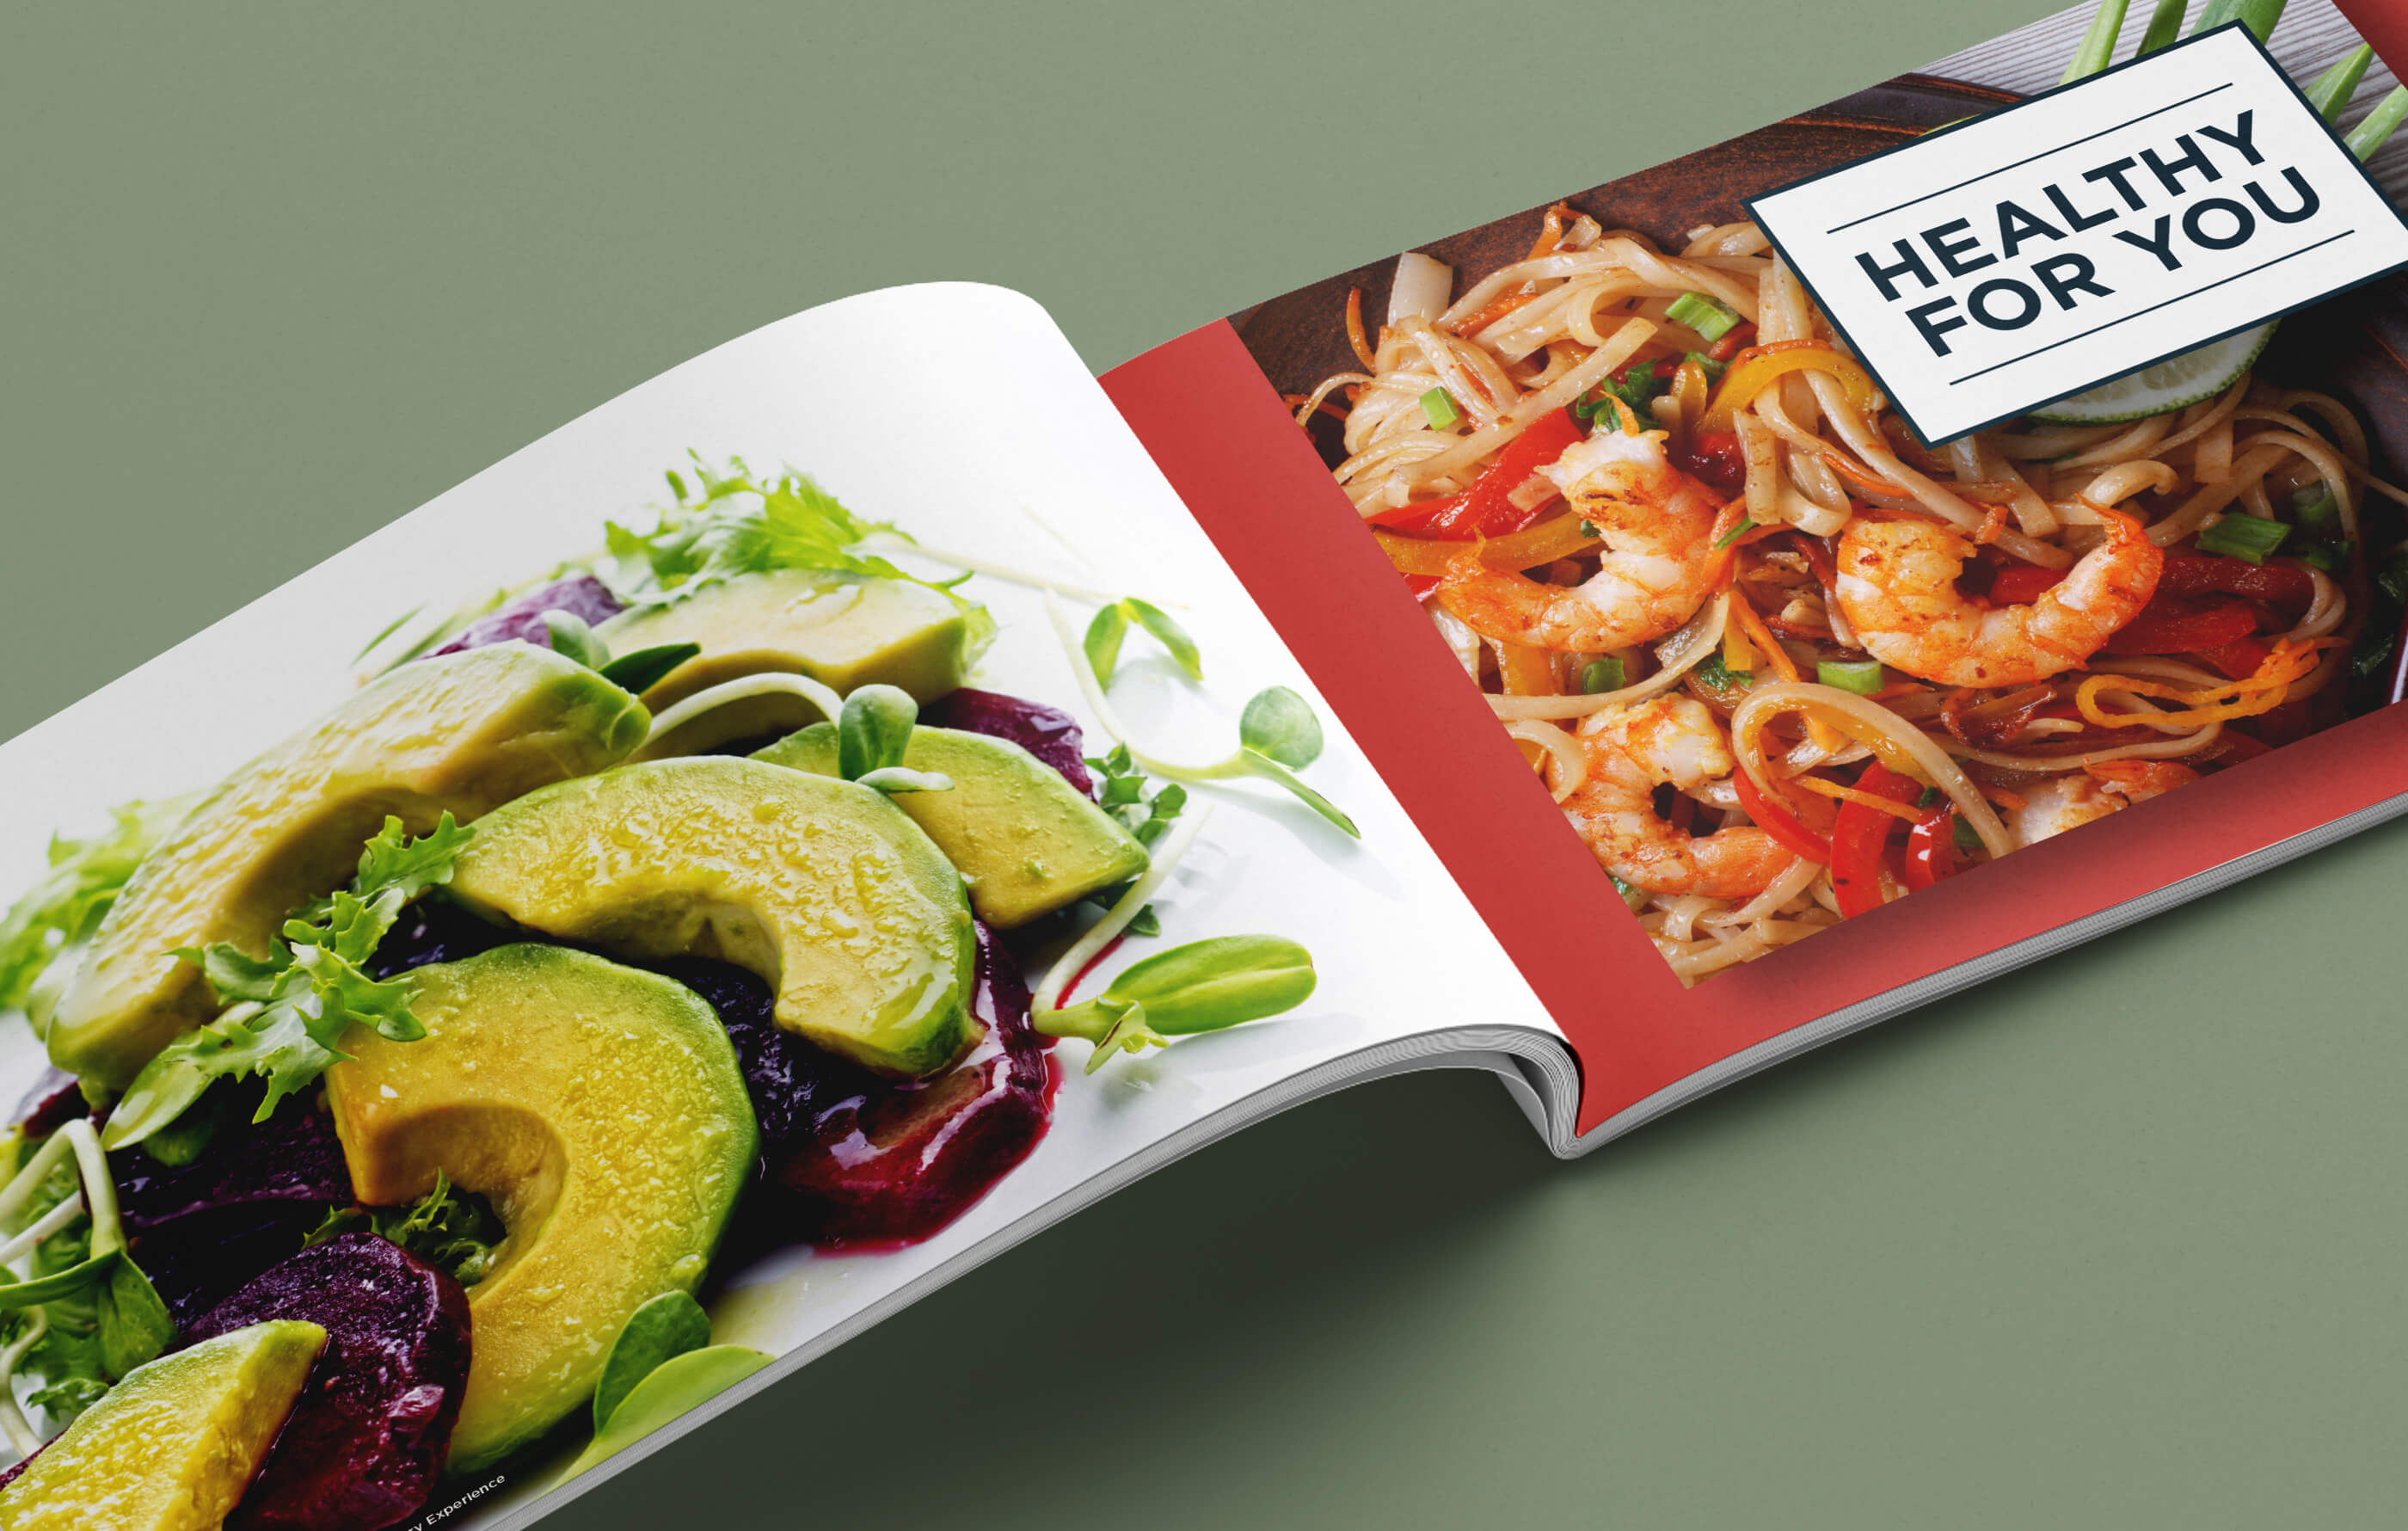 Full page image of an avocado and beetroot salad next to a photo of a king prawn and chilli linguine